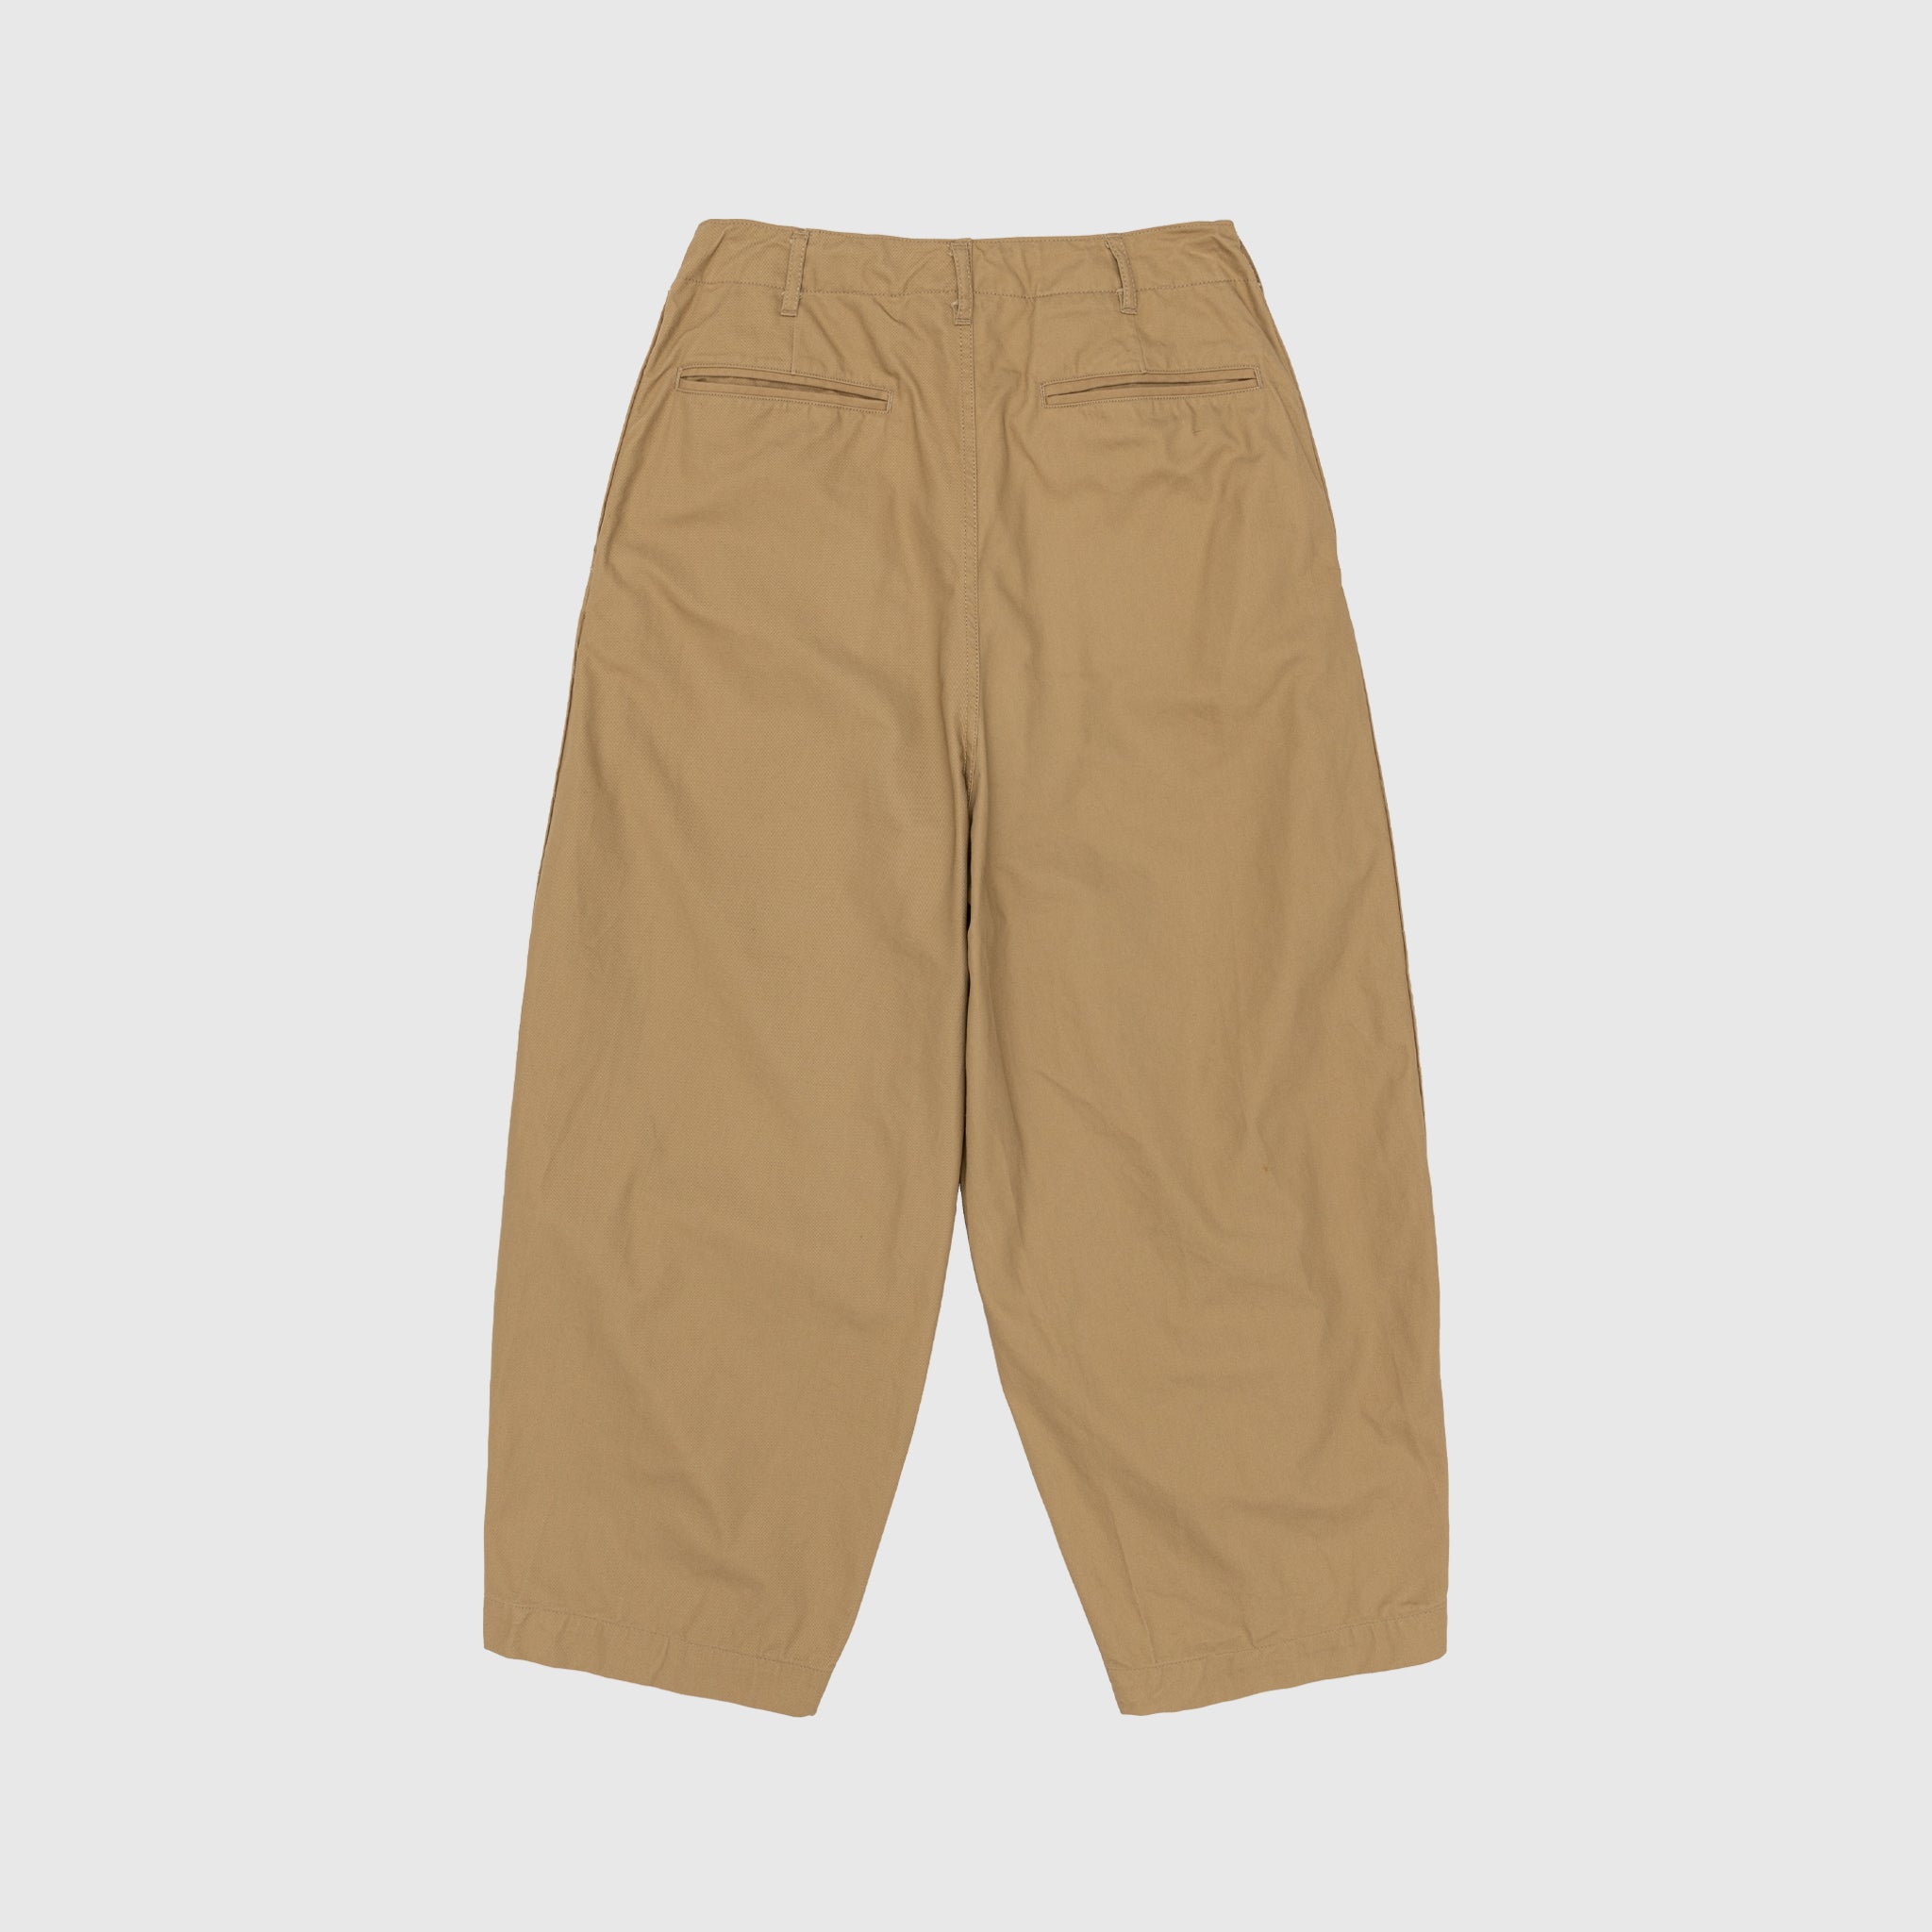 H.D. MILITARY PANT – PACKER SHOES